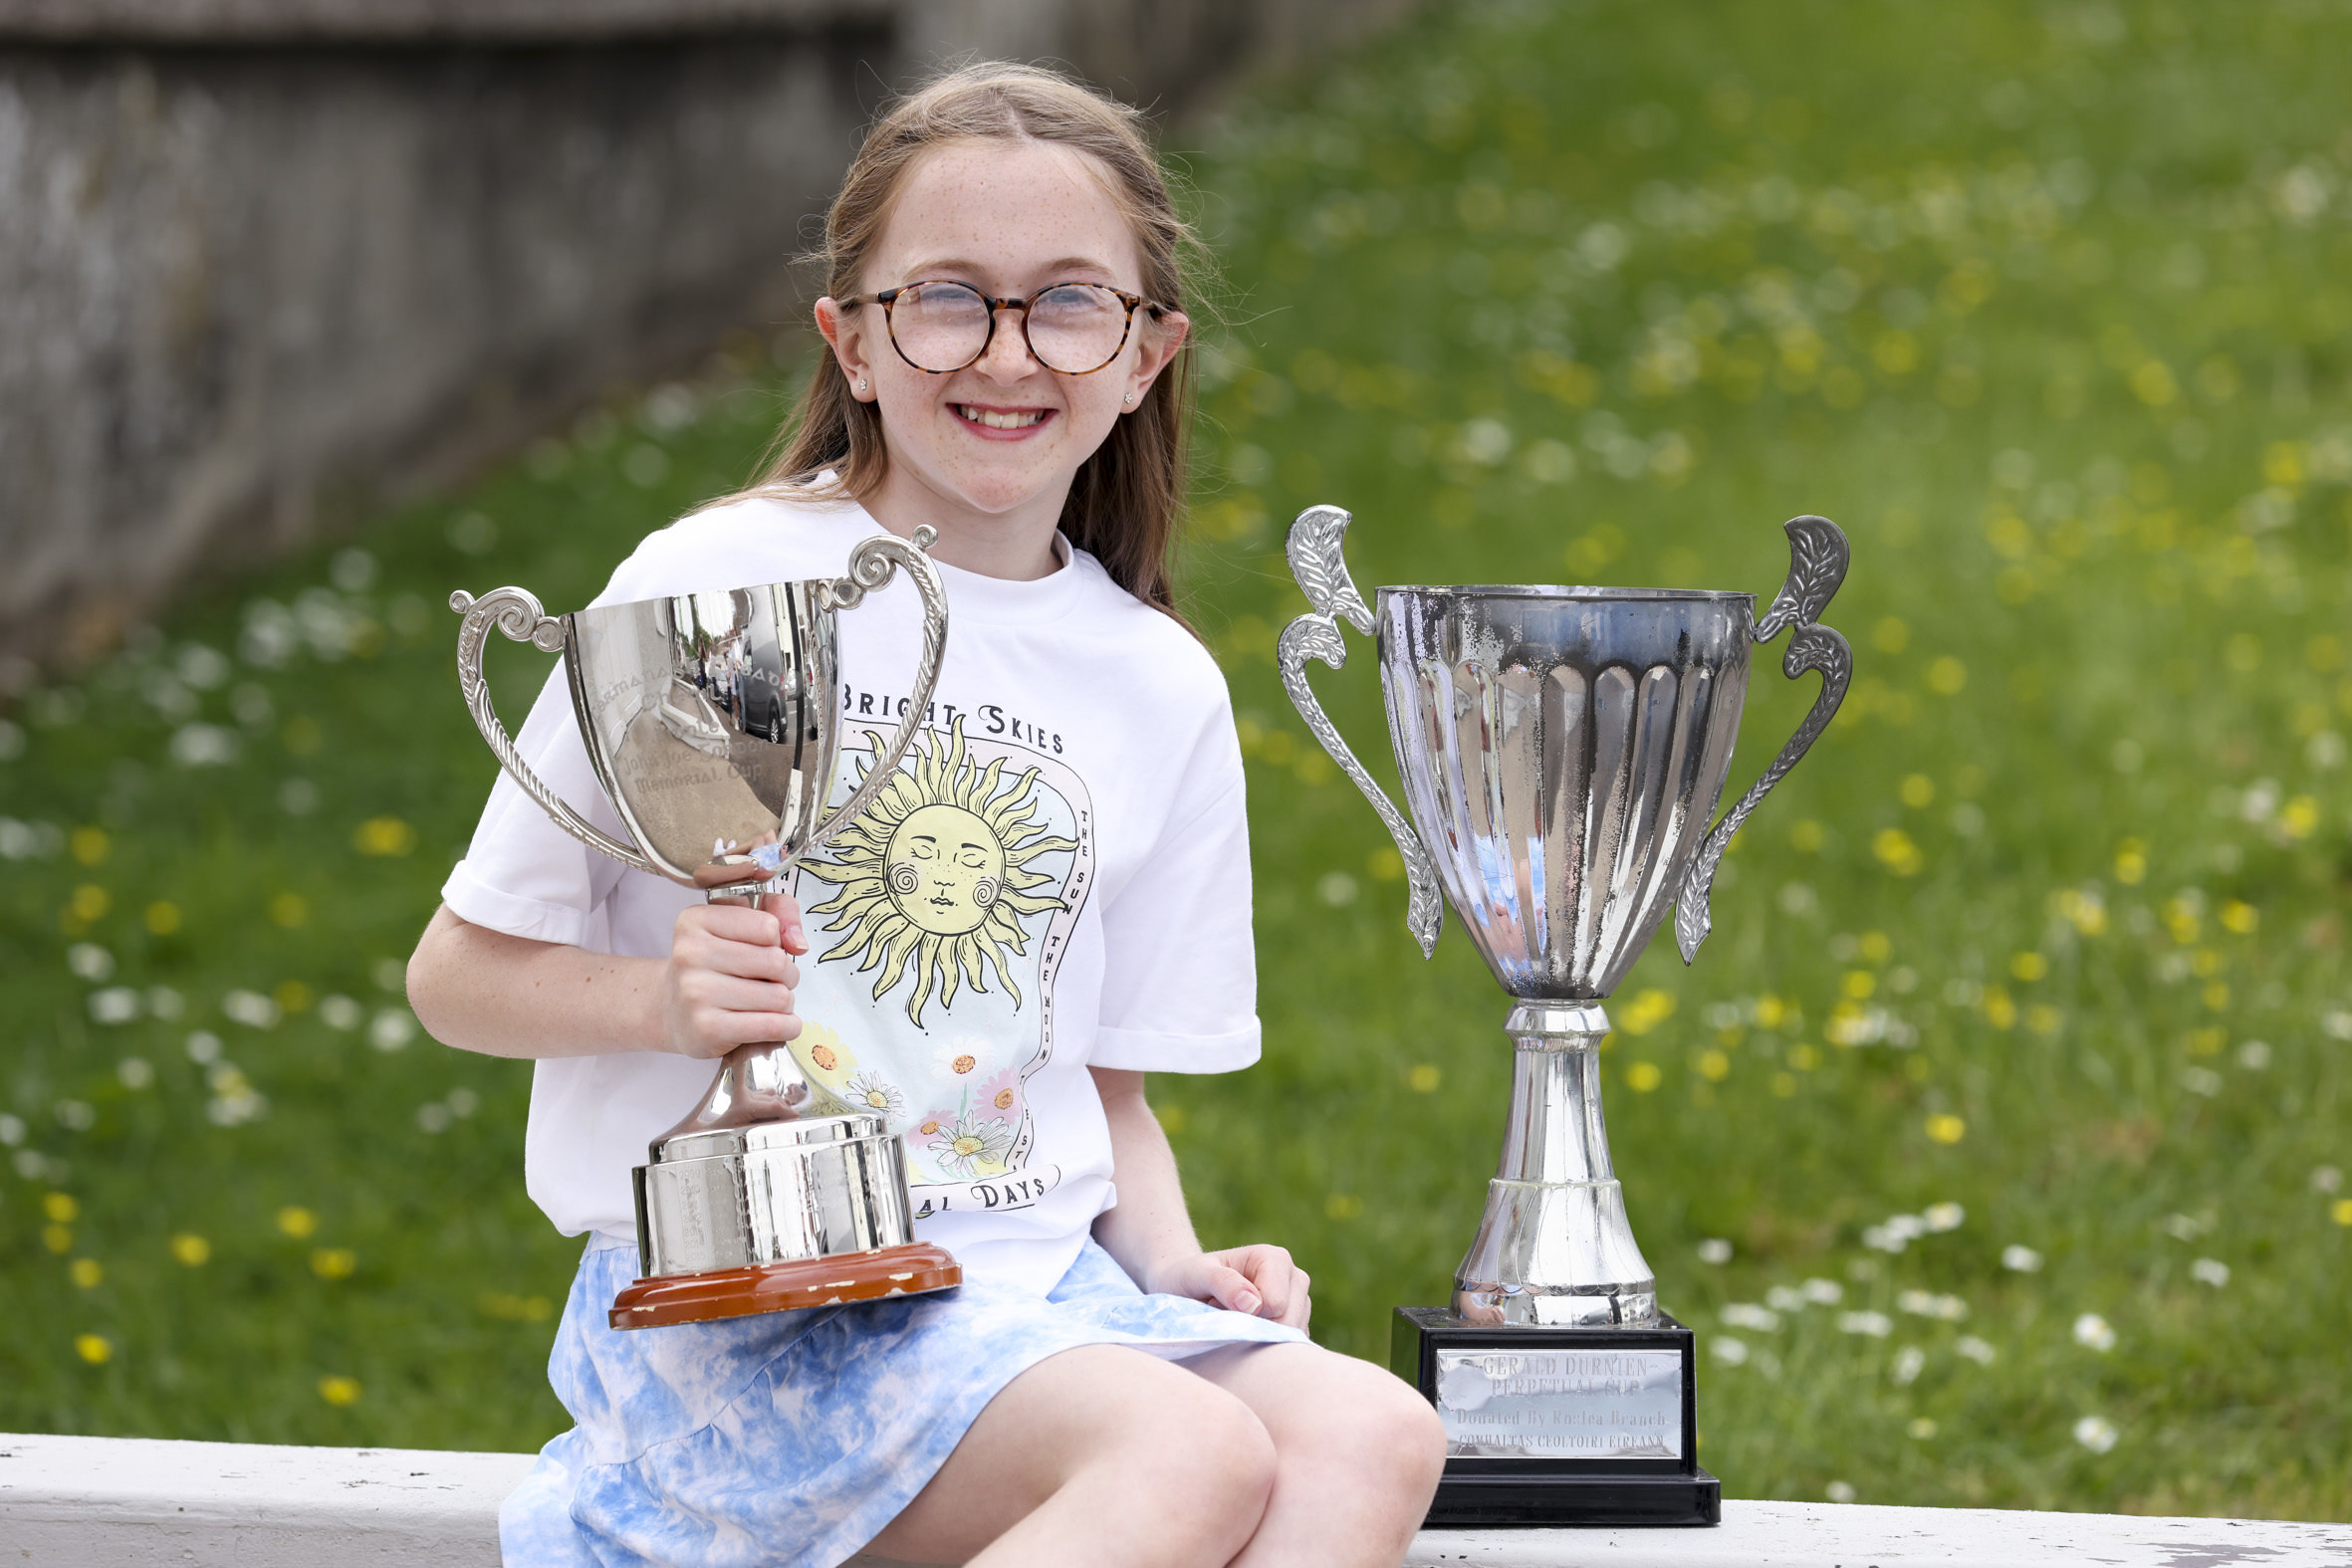 Sarah McKeever who won Under 12 Fiddle in slow air.